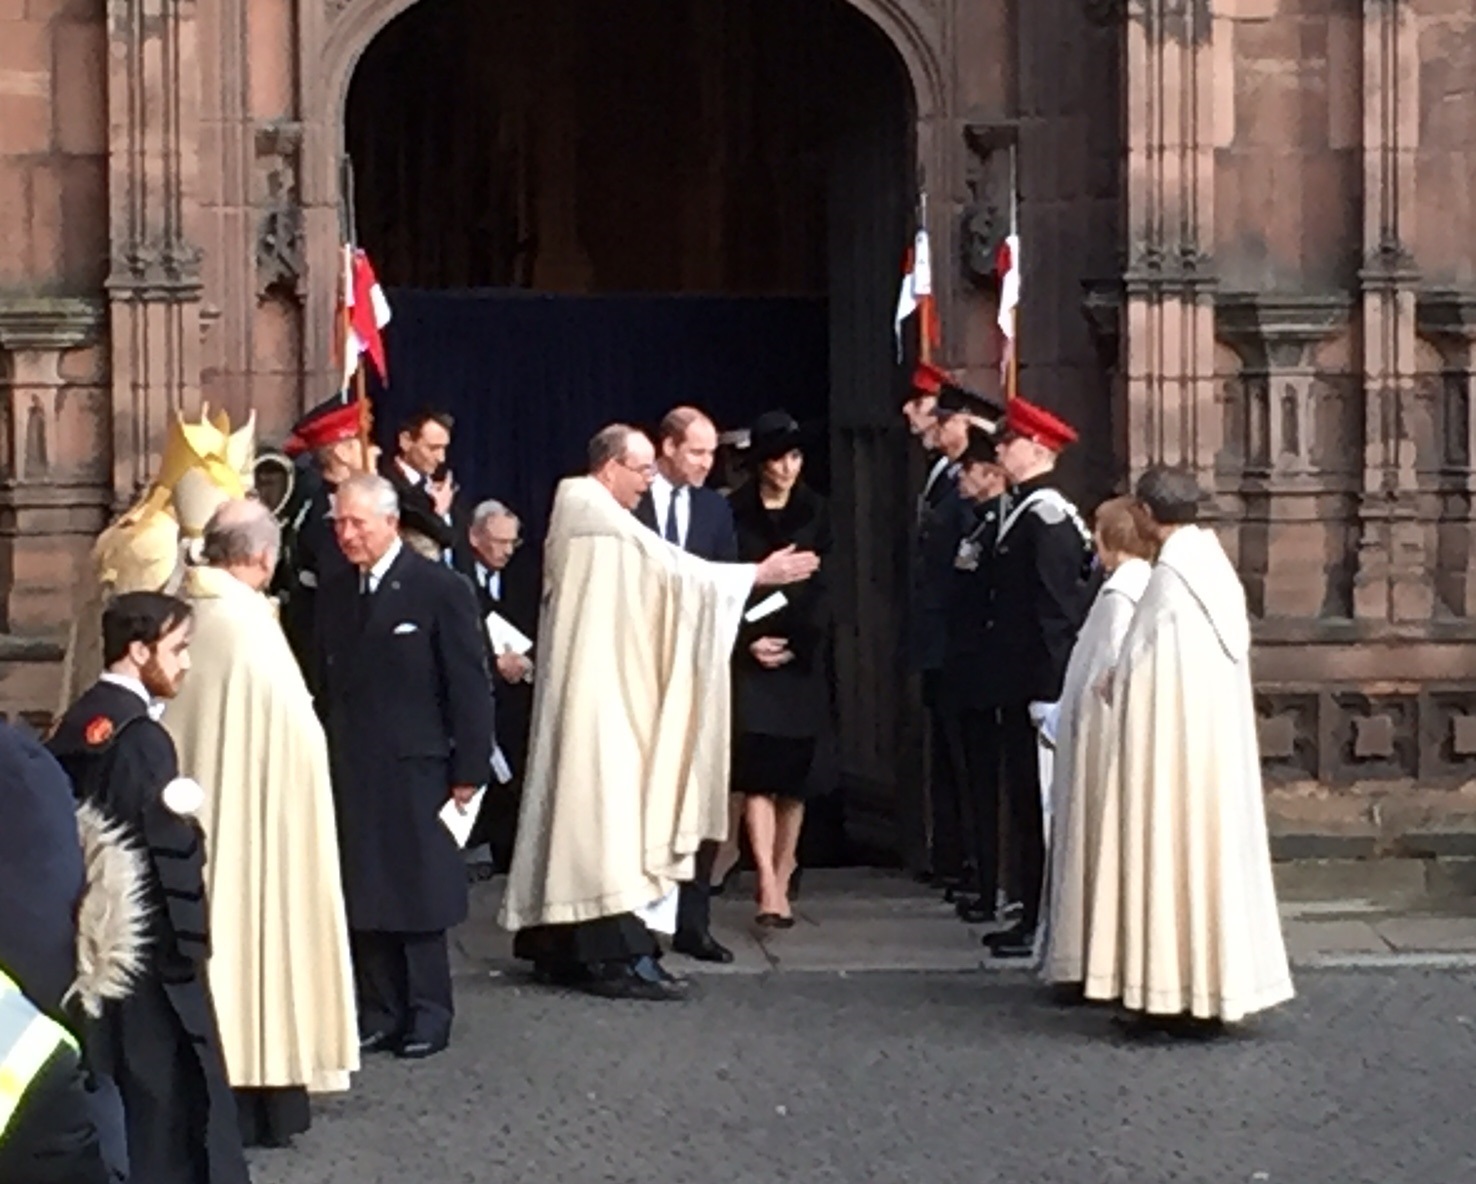 Prince William and Duchess of Cambridge speak to clergy outside the Cathedral